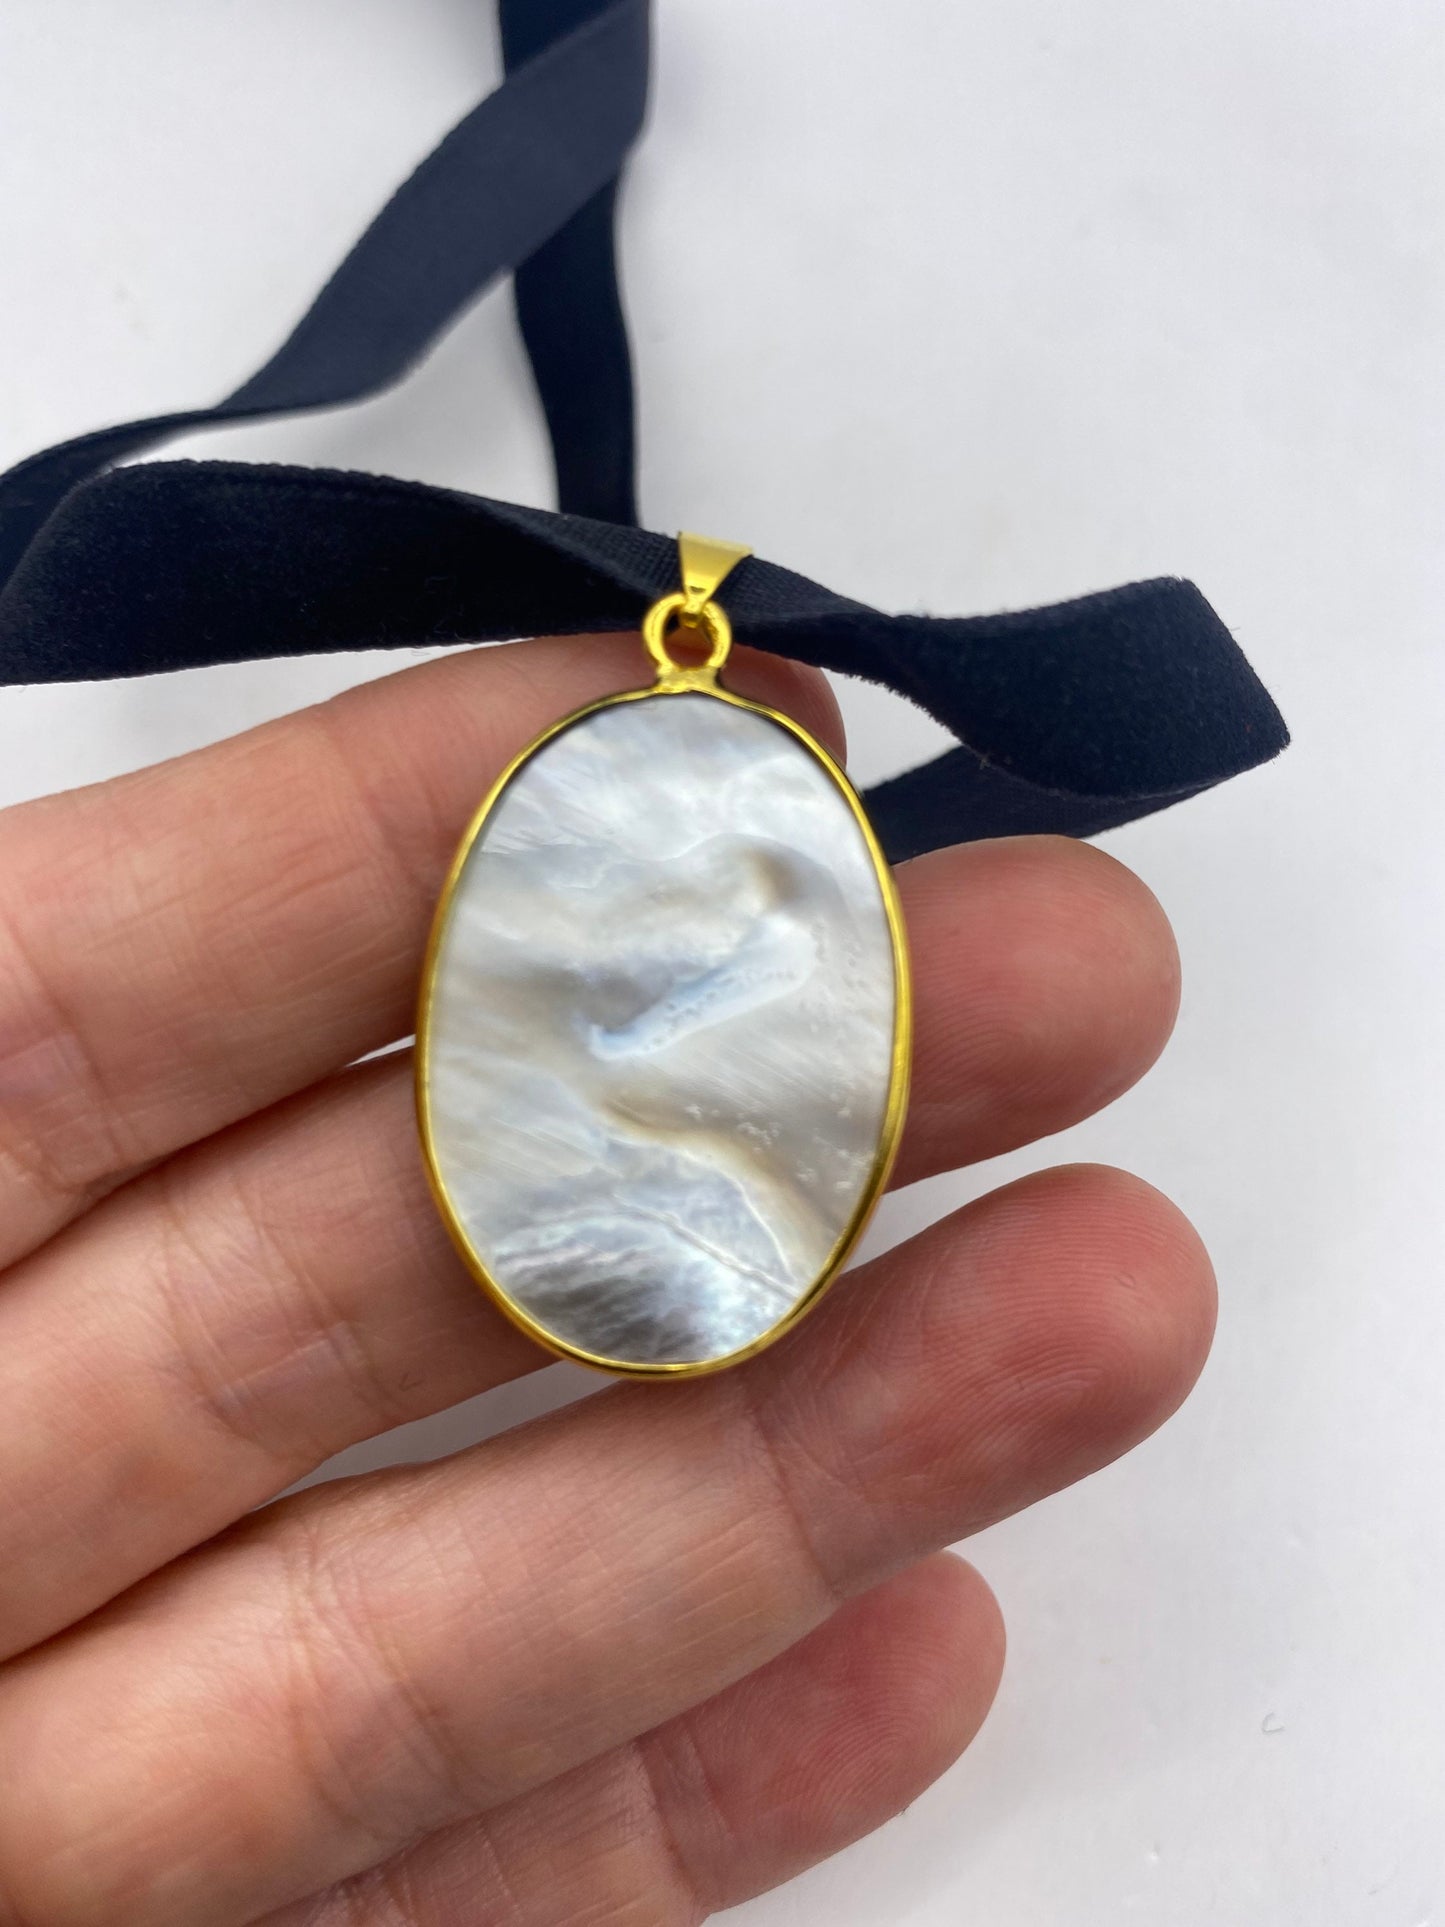 Vintage Jesus Mother of Pearl Cameo Silver Stainless Steel Pendant Necklace